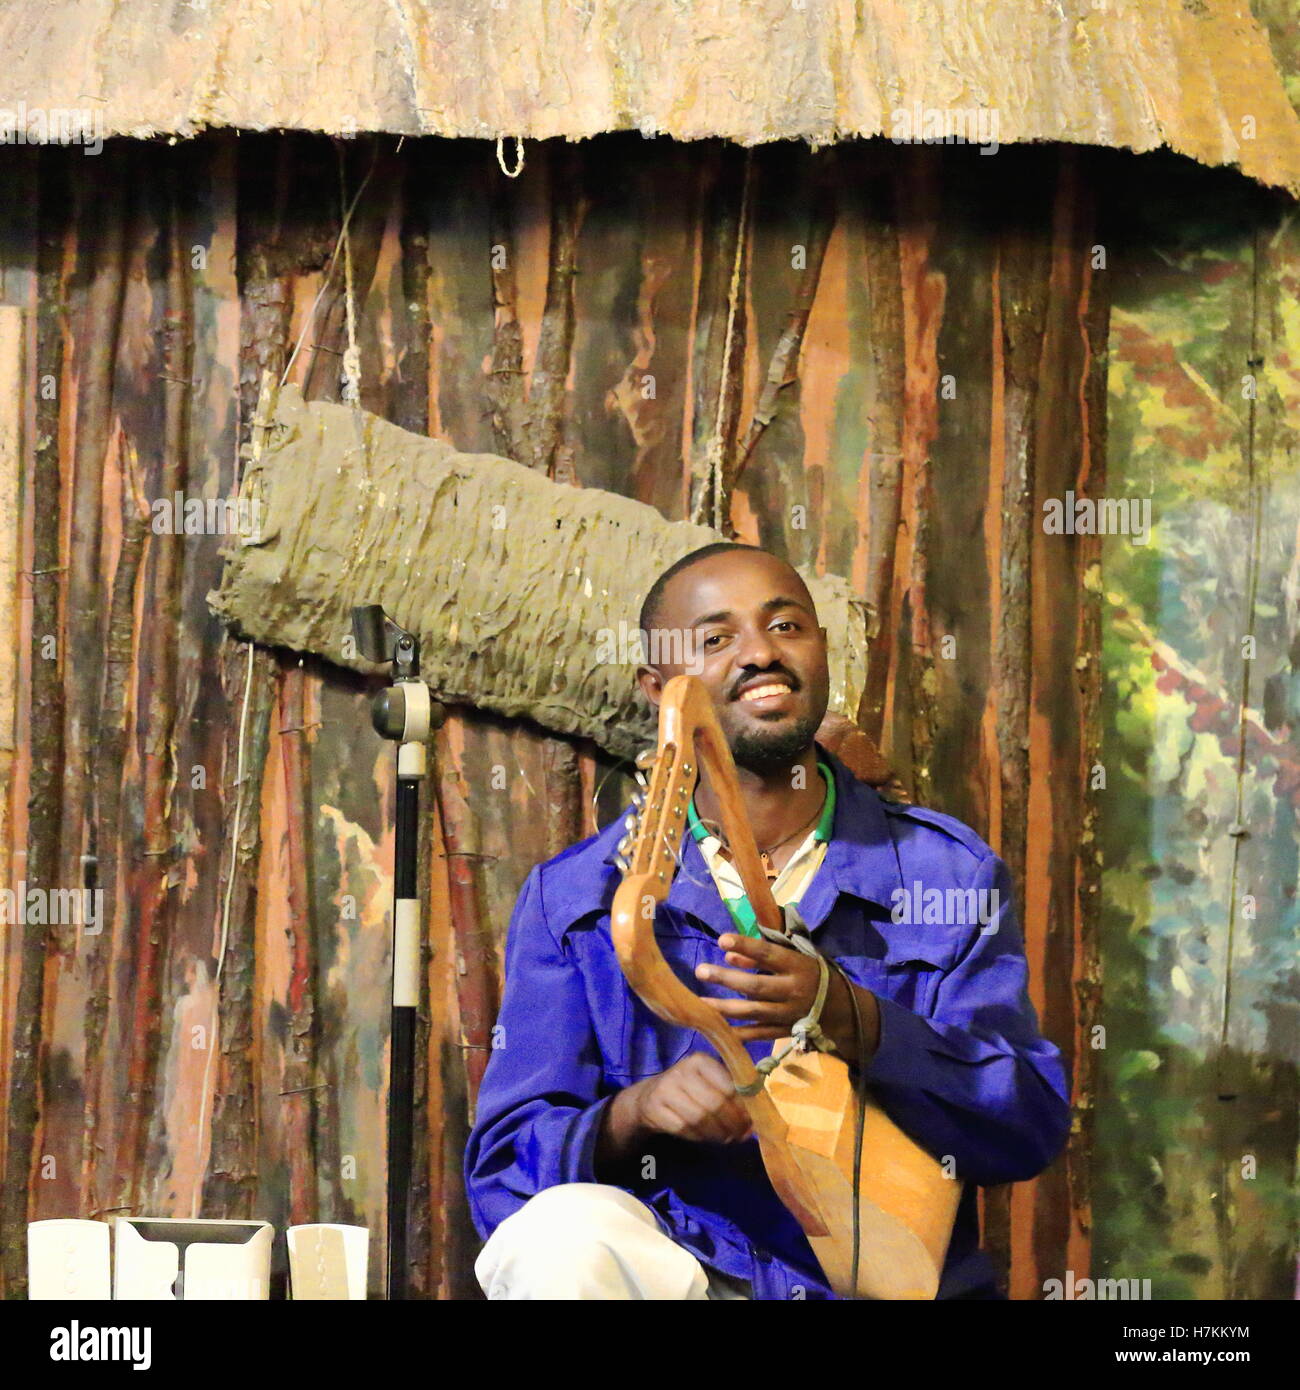 Addis Ababa Ethiopia March 31 Local Musician Plays 6 String Krar Lyre While Performing For